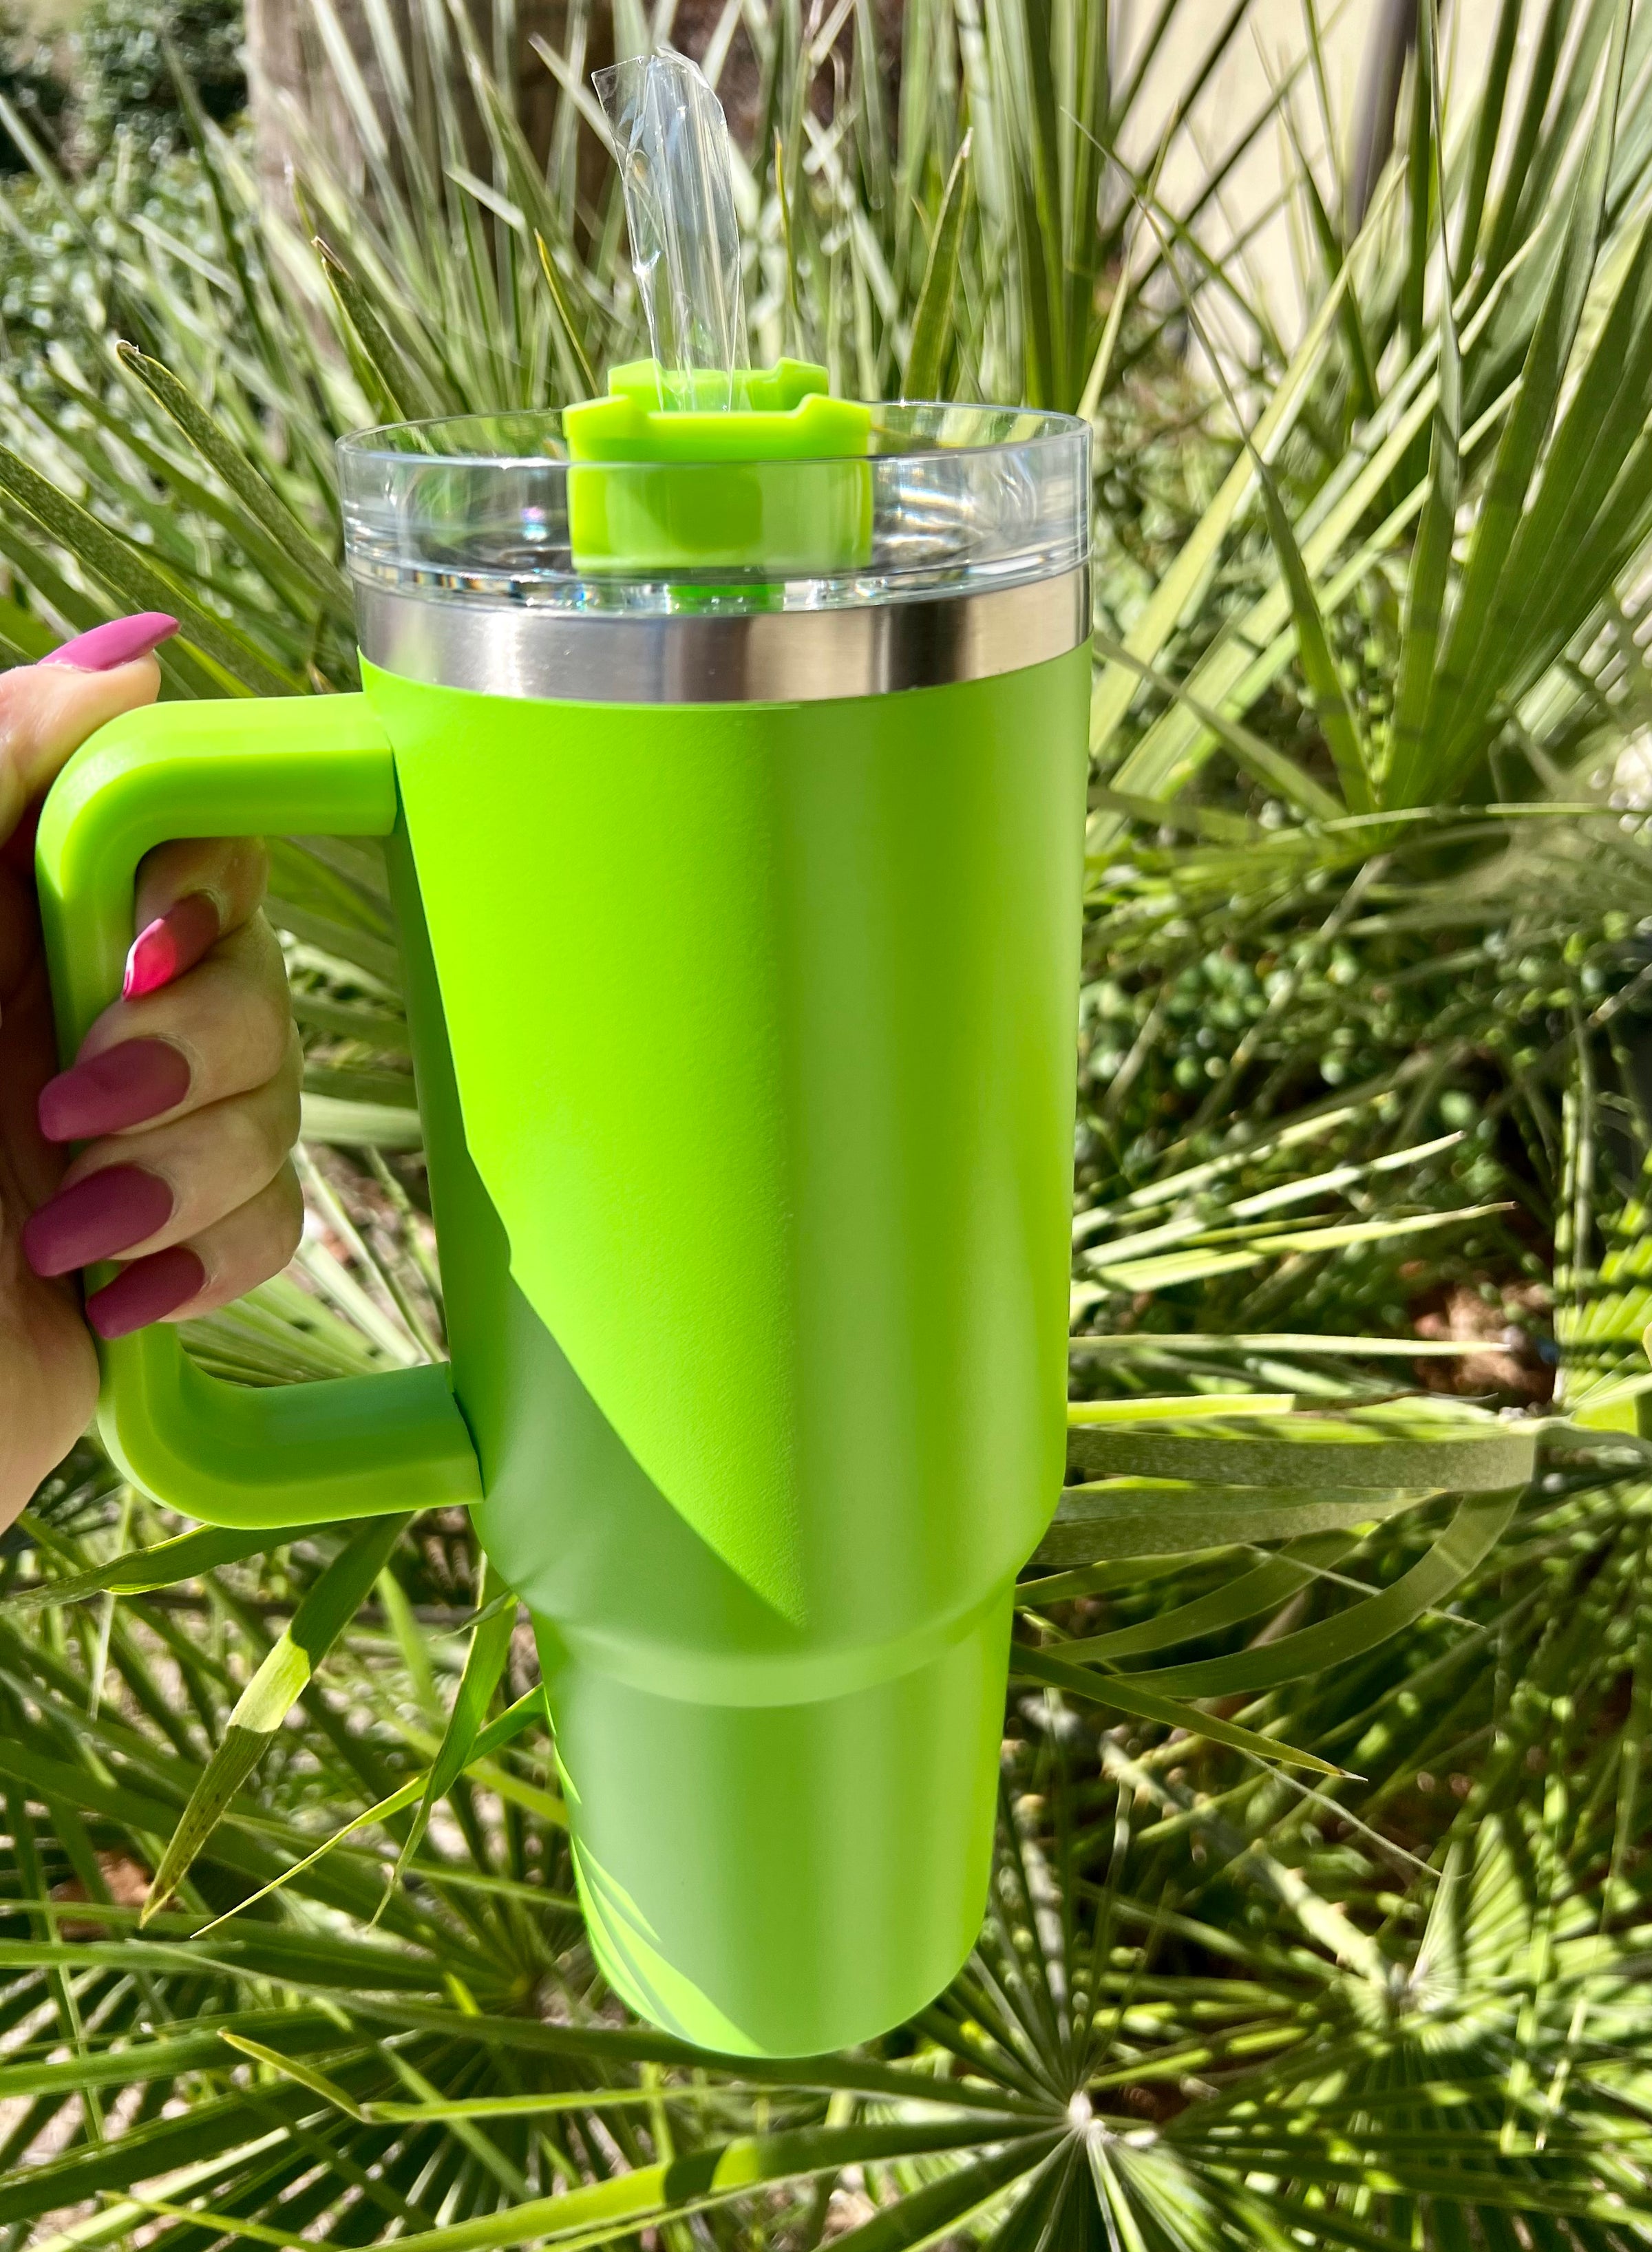 Lime Green 40oz Stainless Steel Tumbler